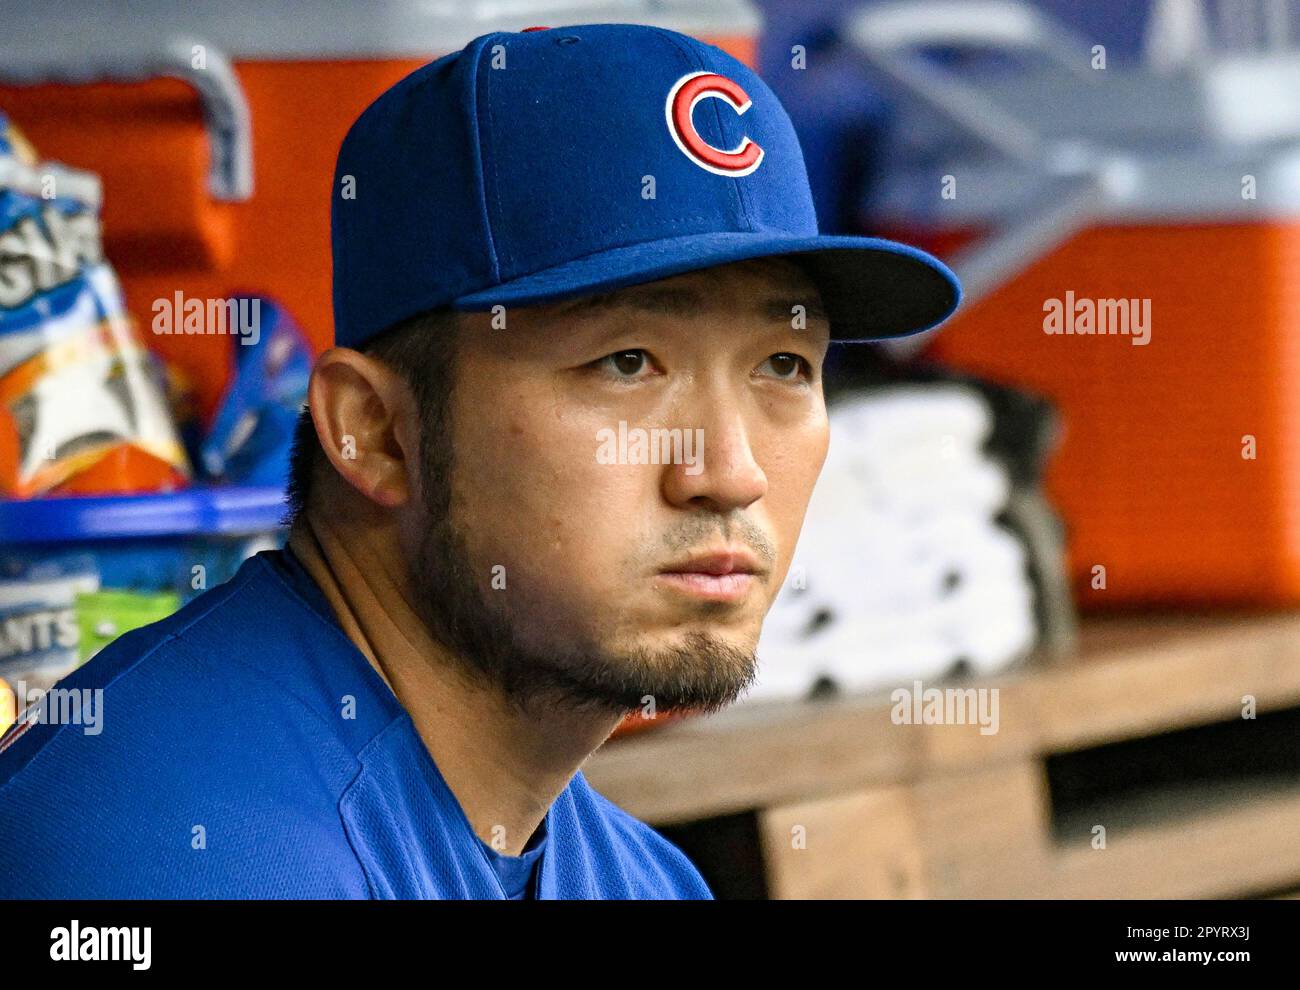 The Chicago Cubs' Seiya Suzuki (R) sits in the dugout after striking out in  the seventh inning of a baseball game against the Arizona Diamondbacks on  May 22, 2022, at Wrigley Field